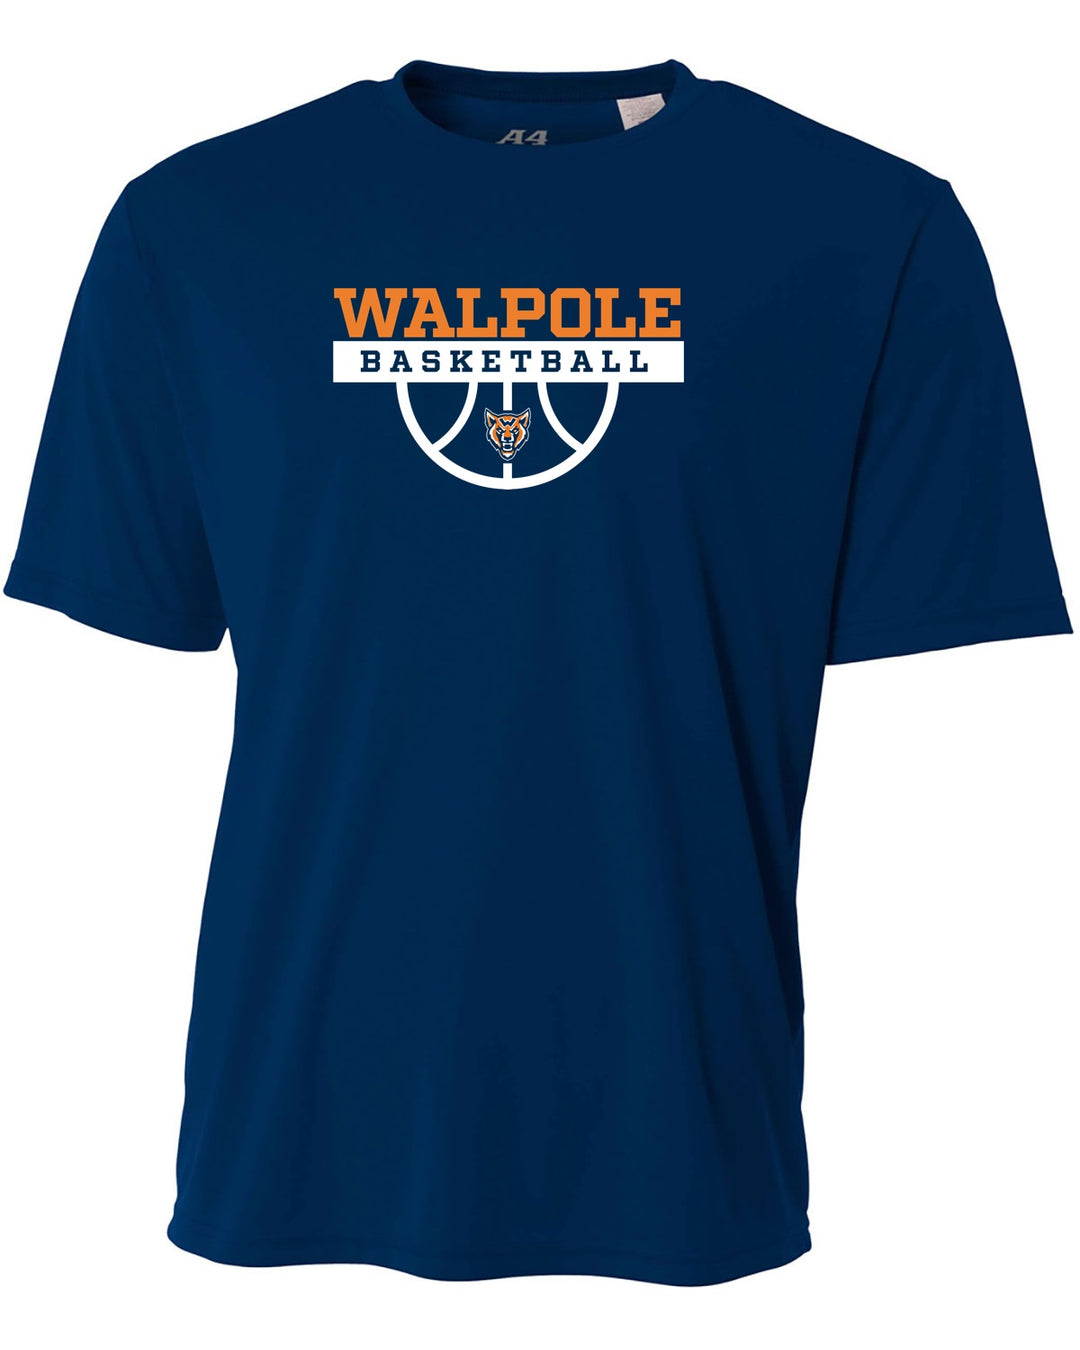 Walpole Youth Basketball A4 Youth Cooling Performance T-Shirt (NB3142)